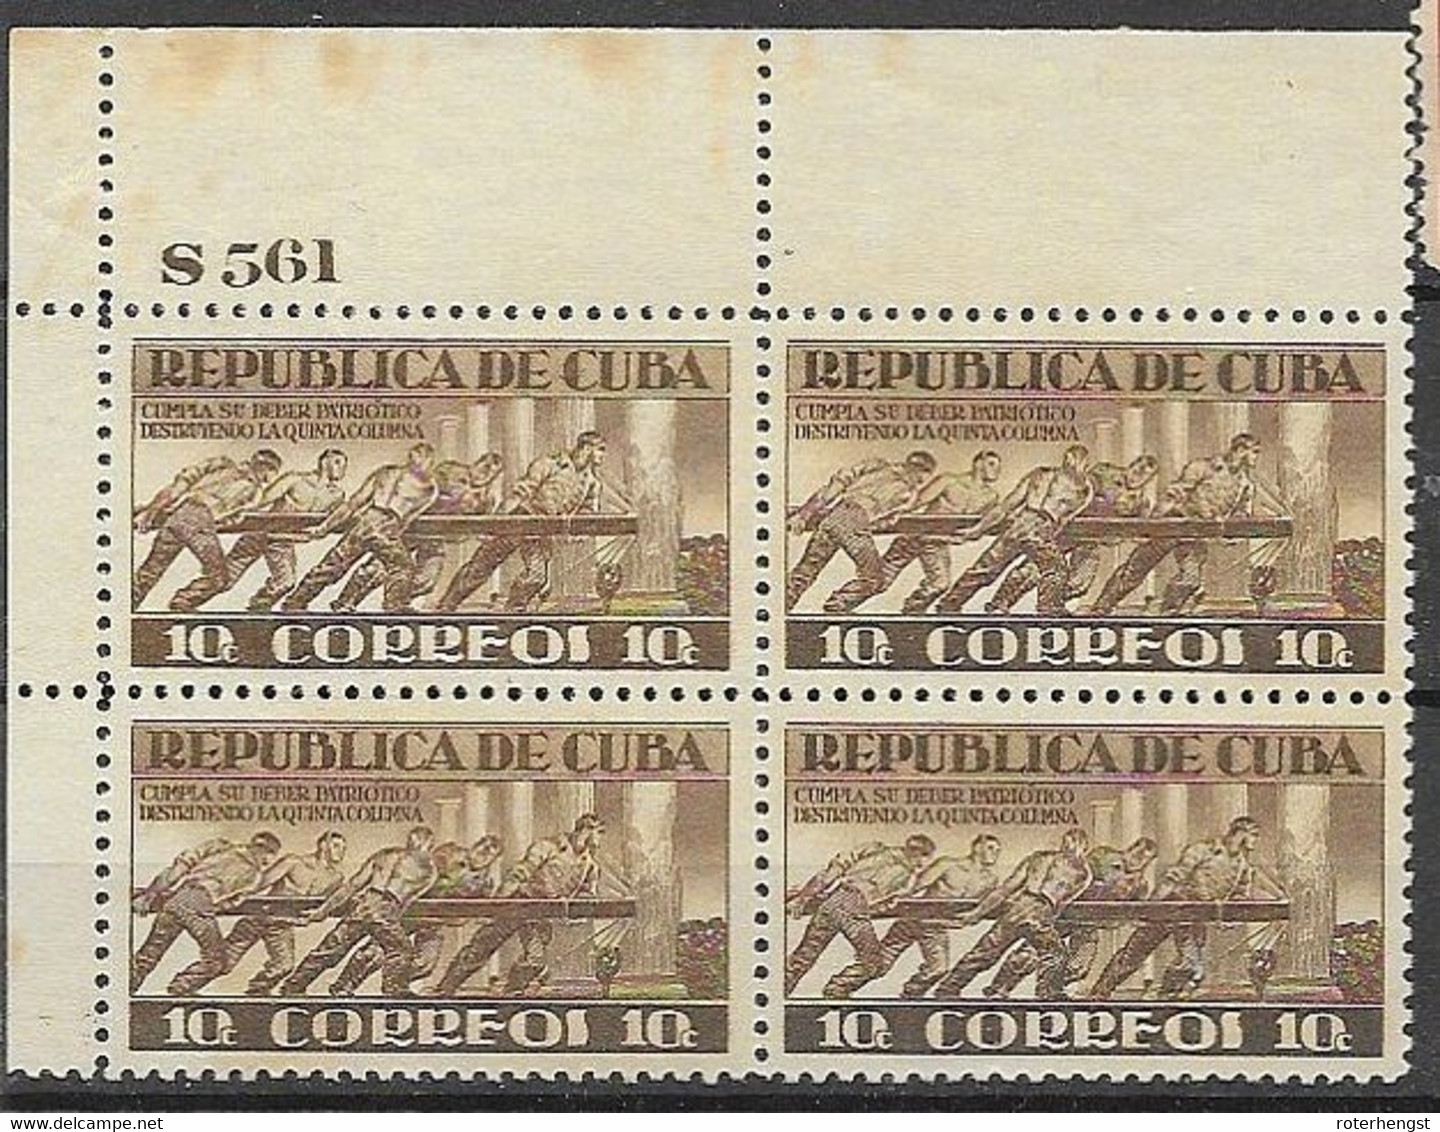 Cuba Mnh ** With Plate Number (stain Only On Border, Stamps Fine) 1943 About 30 Euros - Unused Stamps